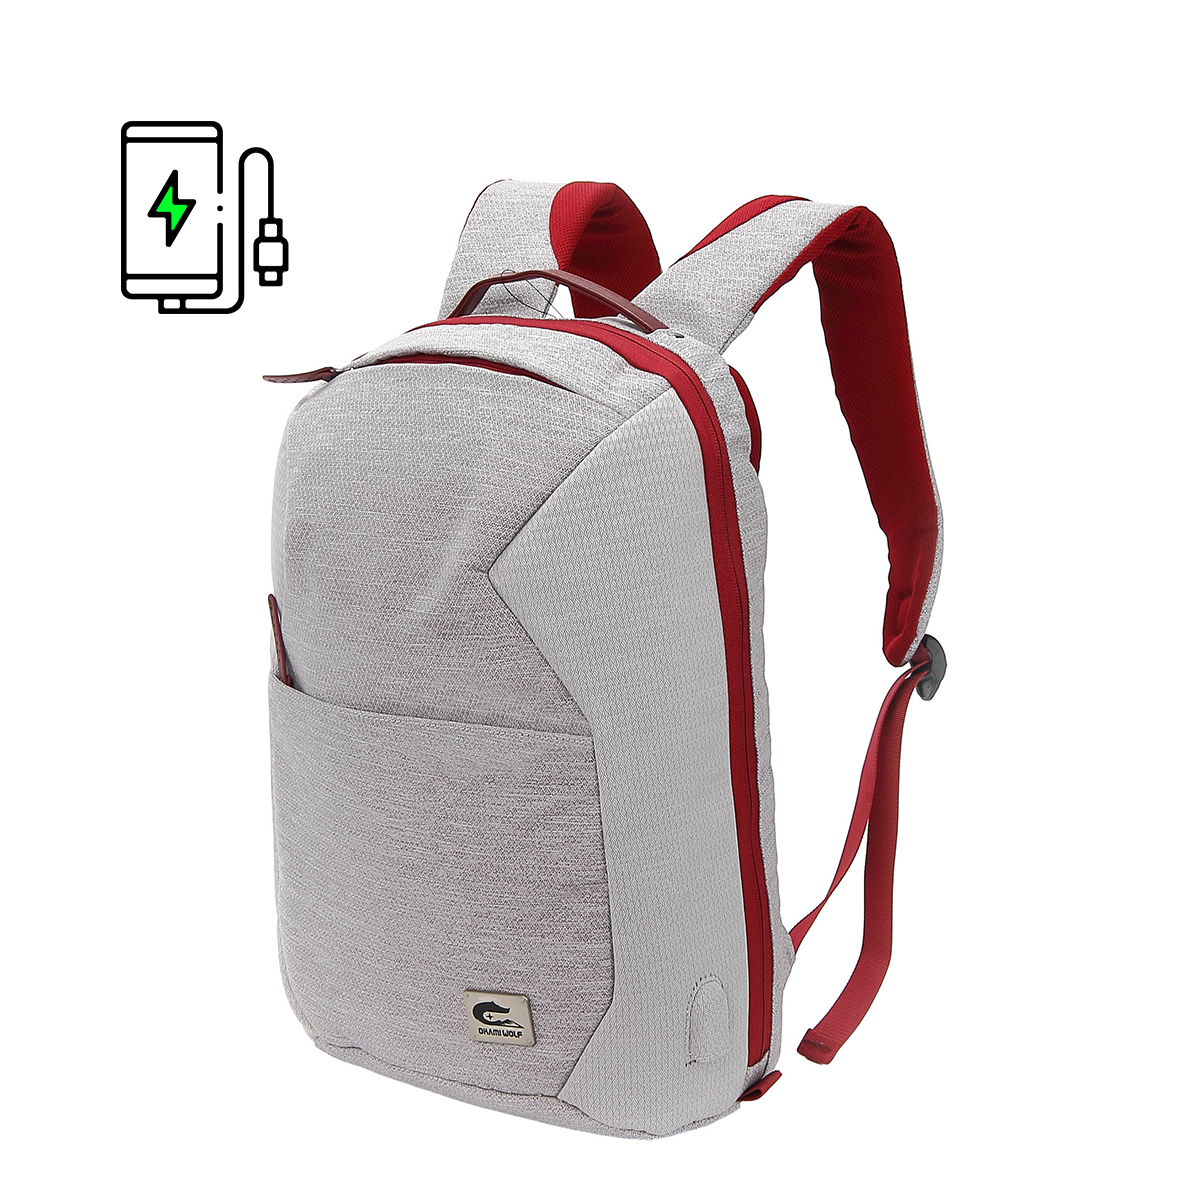 Urban Scarlet Laptop Backpack with USB Fast-Charging